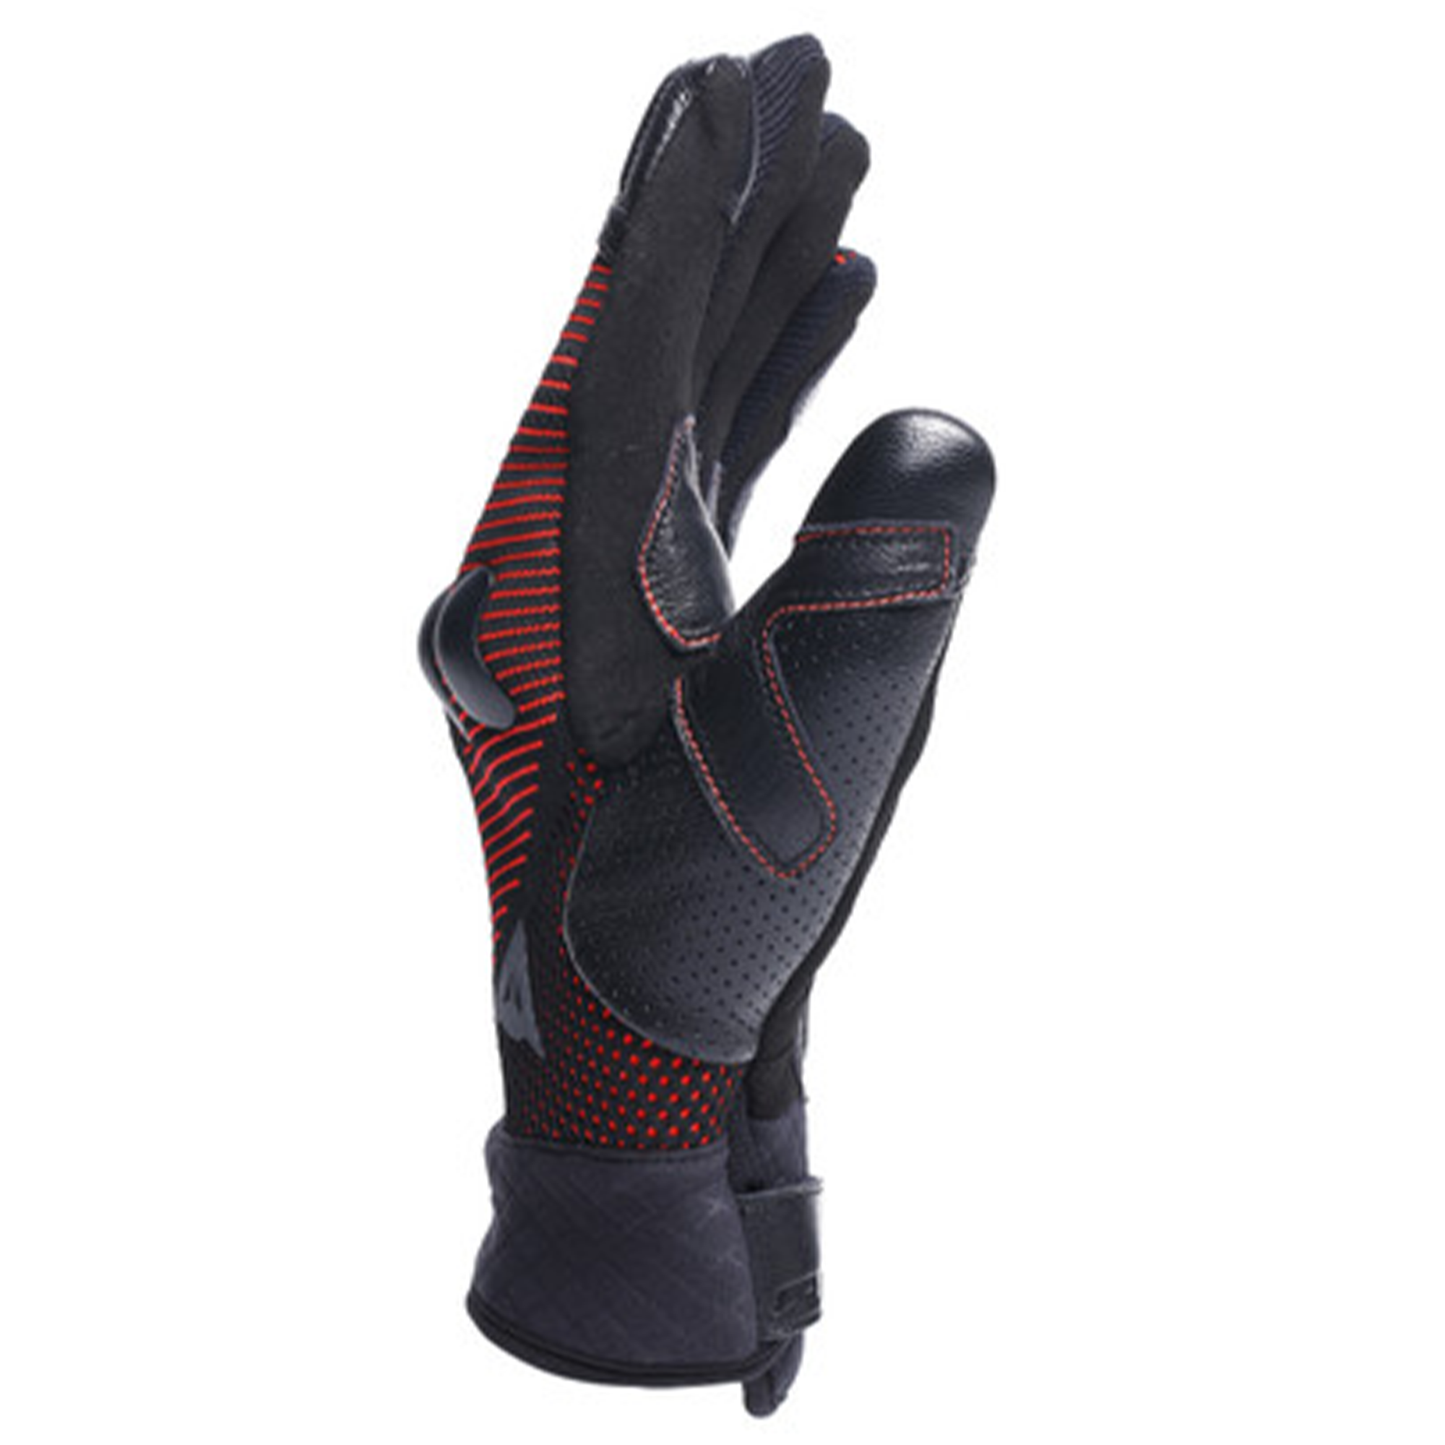 Dainese Unruly Ergo-Tec Gloves - Black/Flo Red (628)